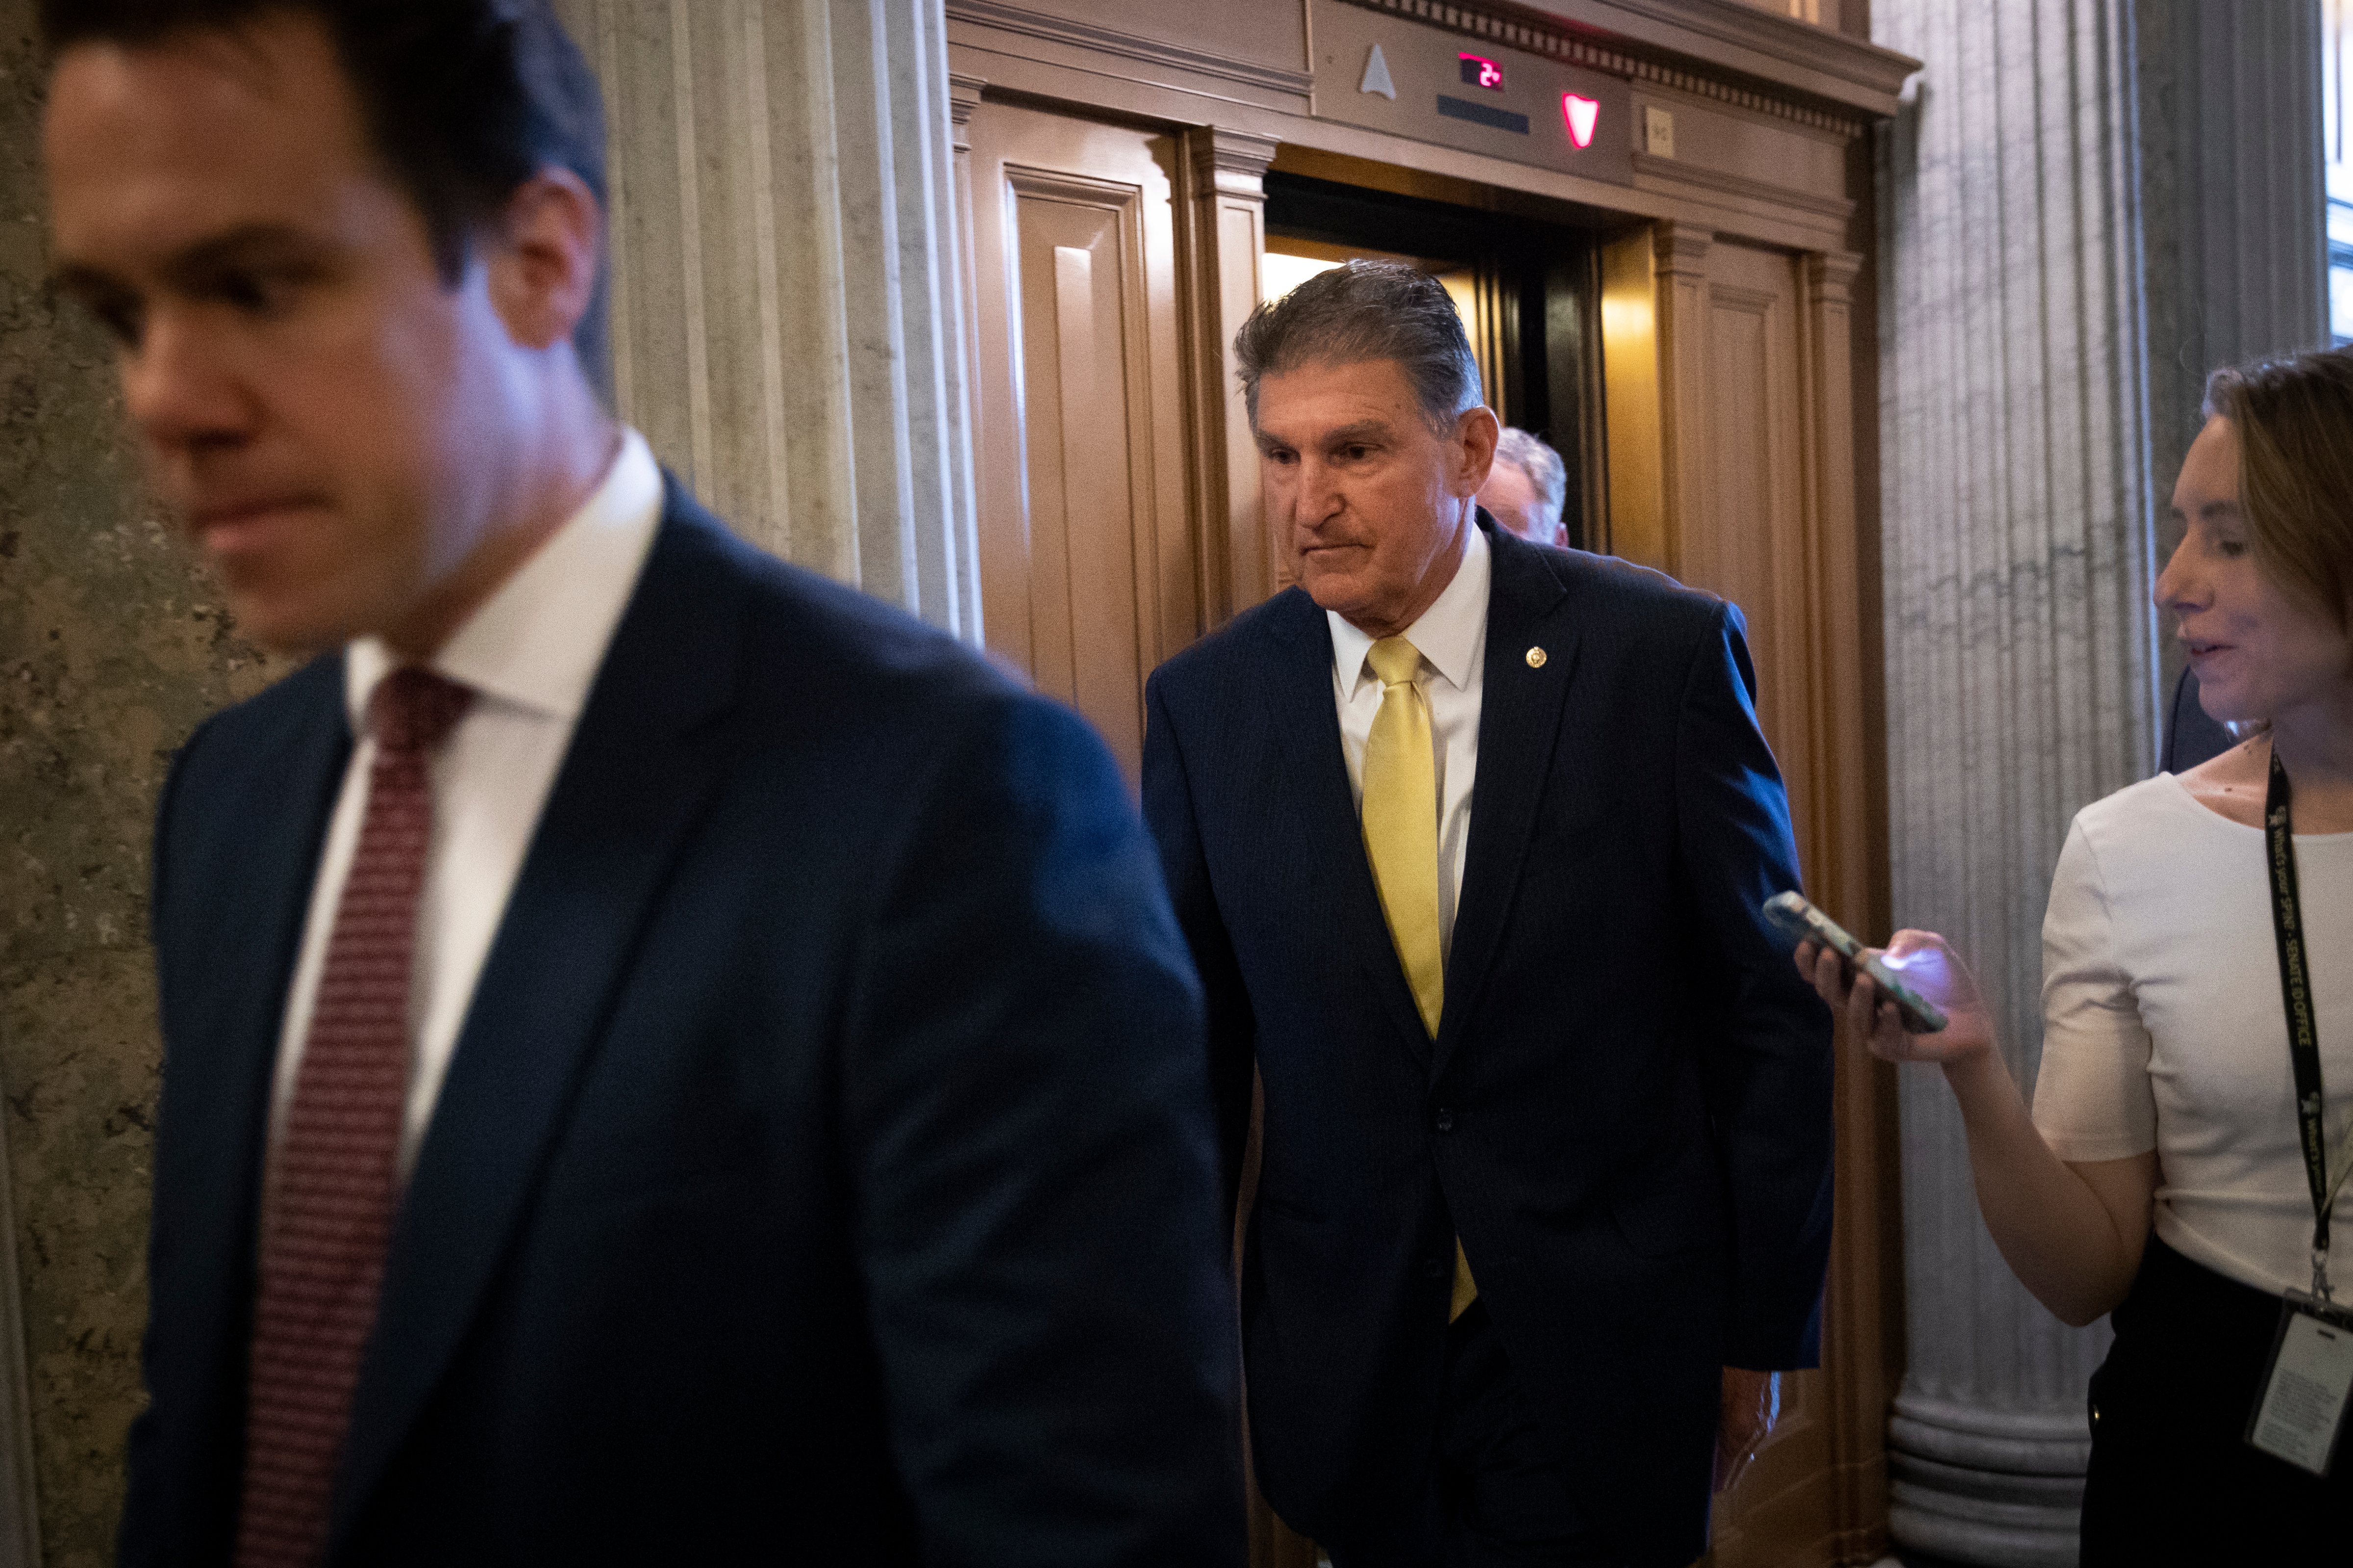 Sen. Joe Manchin (D-WV) walks to the Senate floor for a cloture vote on the nomination of Supreme Court Judge Brett Kavanaugh to the U.S. Supreme Court, at the U.S. Capitol, October 5, 2018 in Washington, DC. (Drew Angerer—Getty Images)